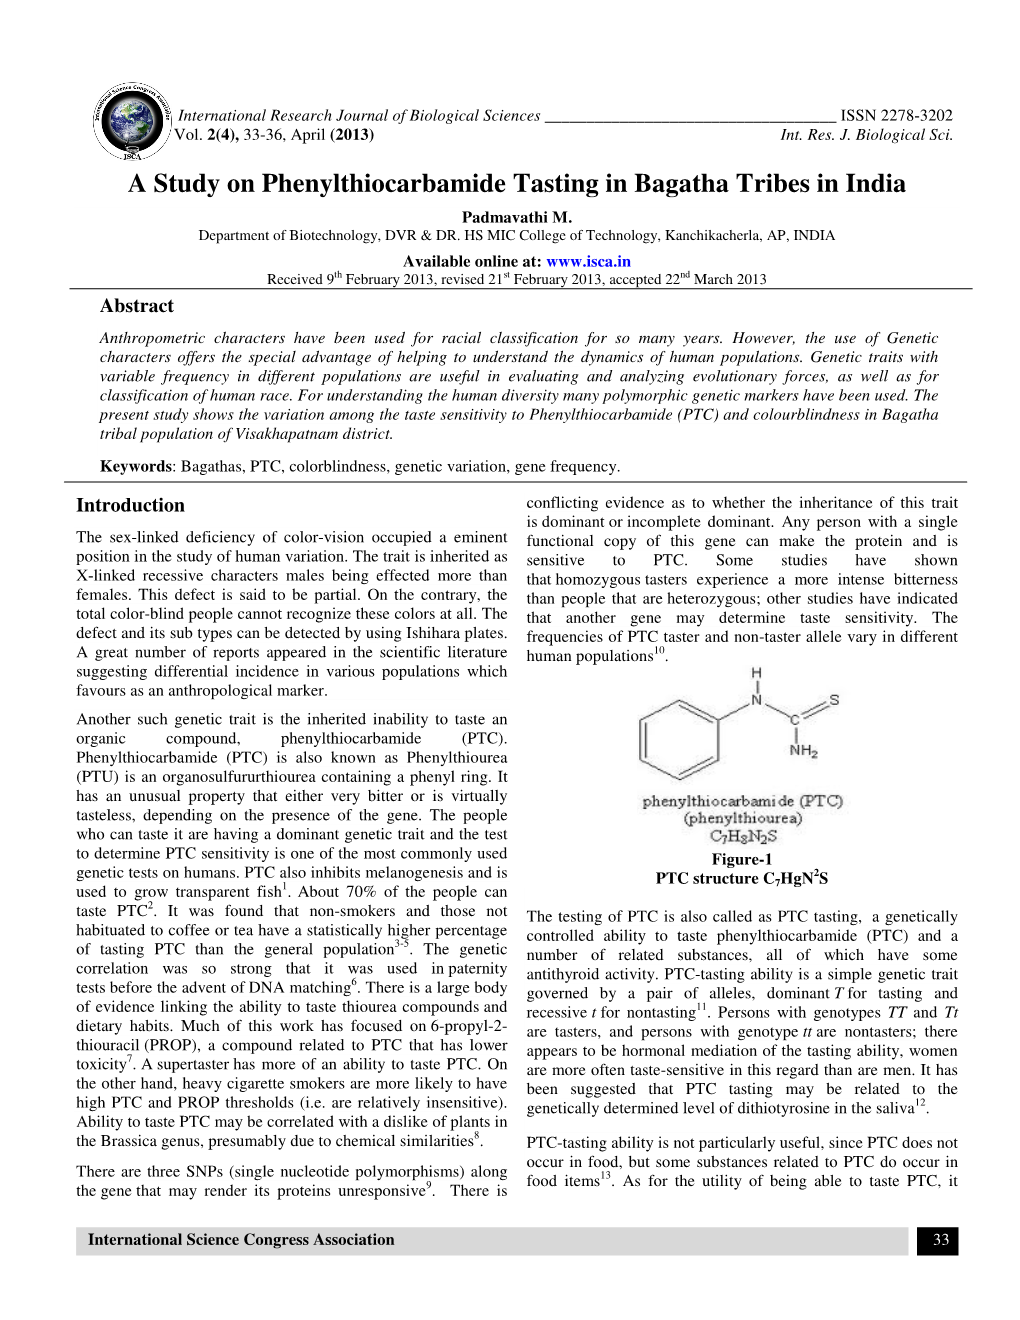 A Study on Phenylthiocarbamide Tasting in Bagatha Tribes in India